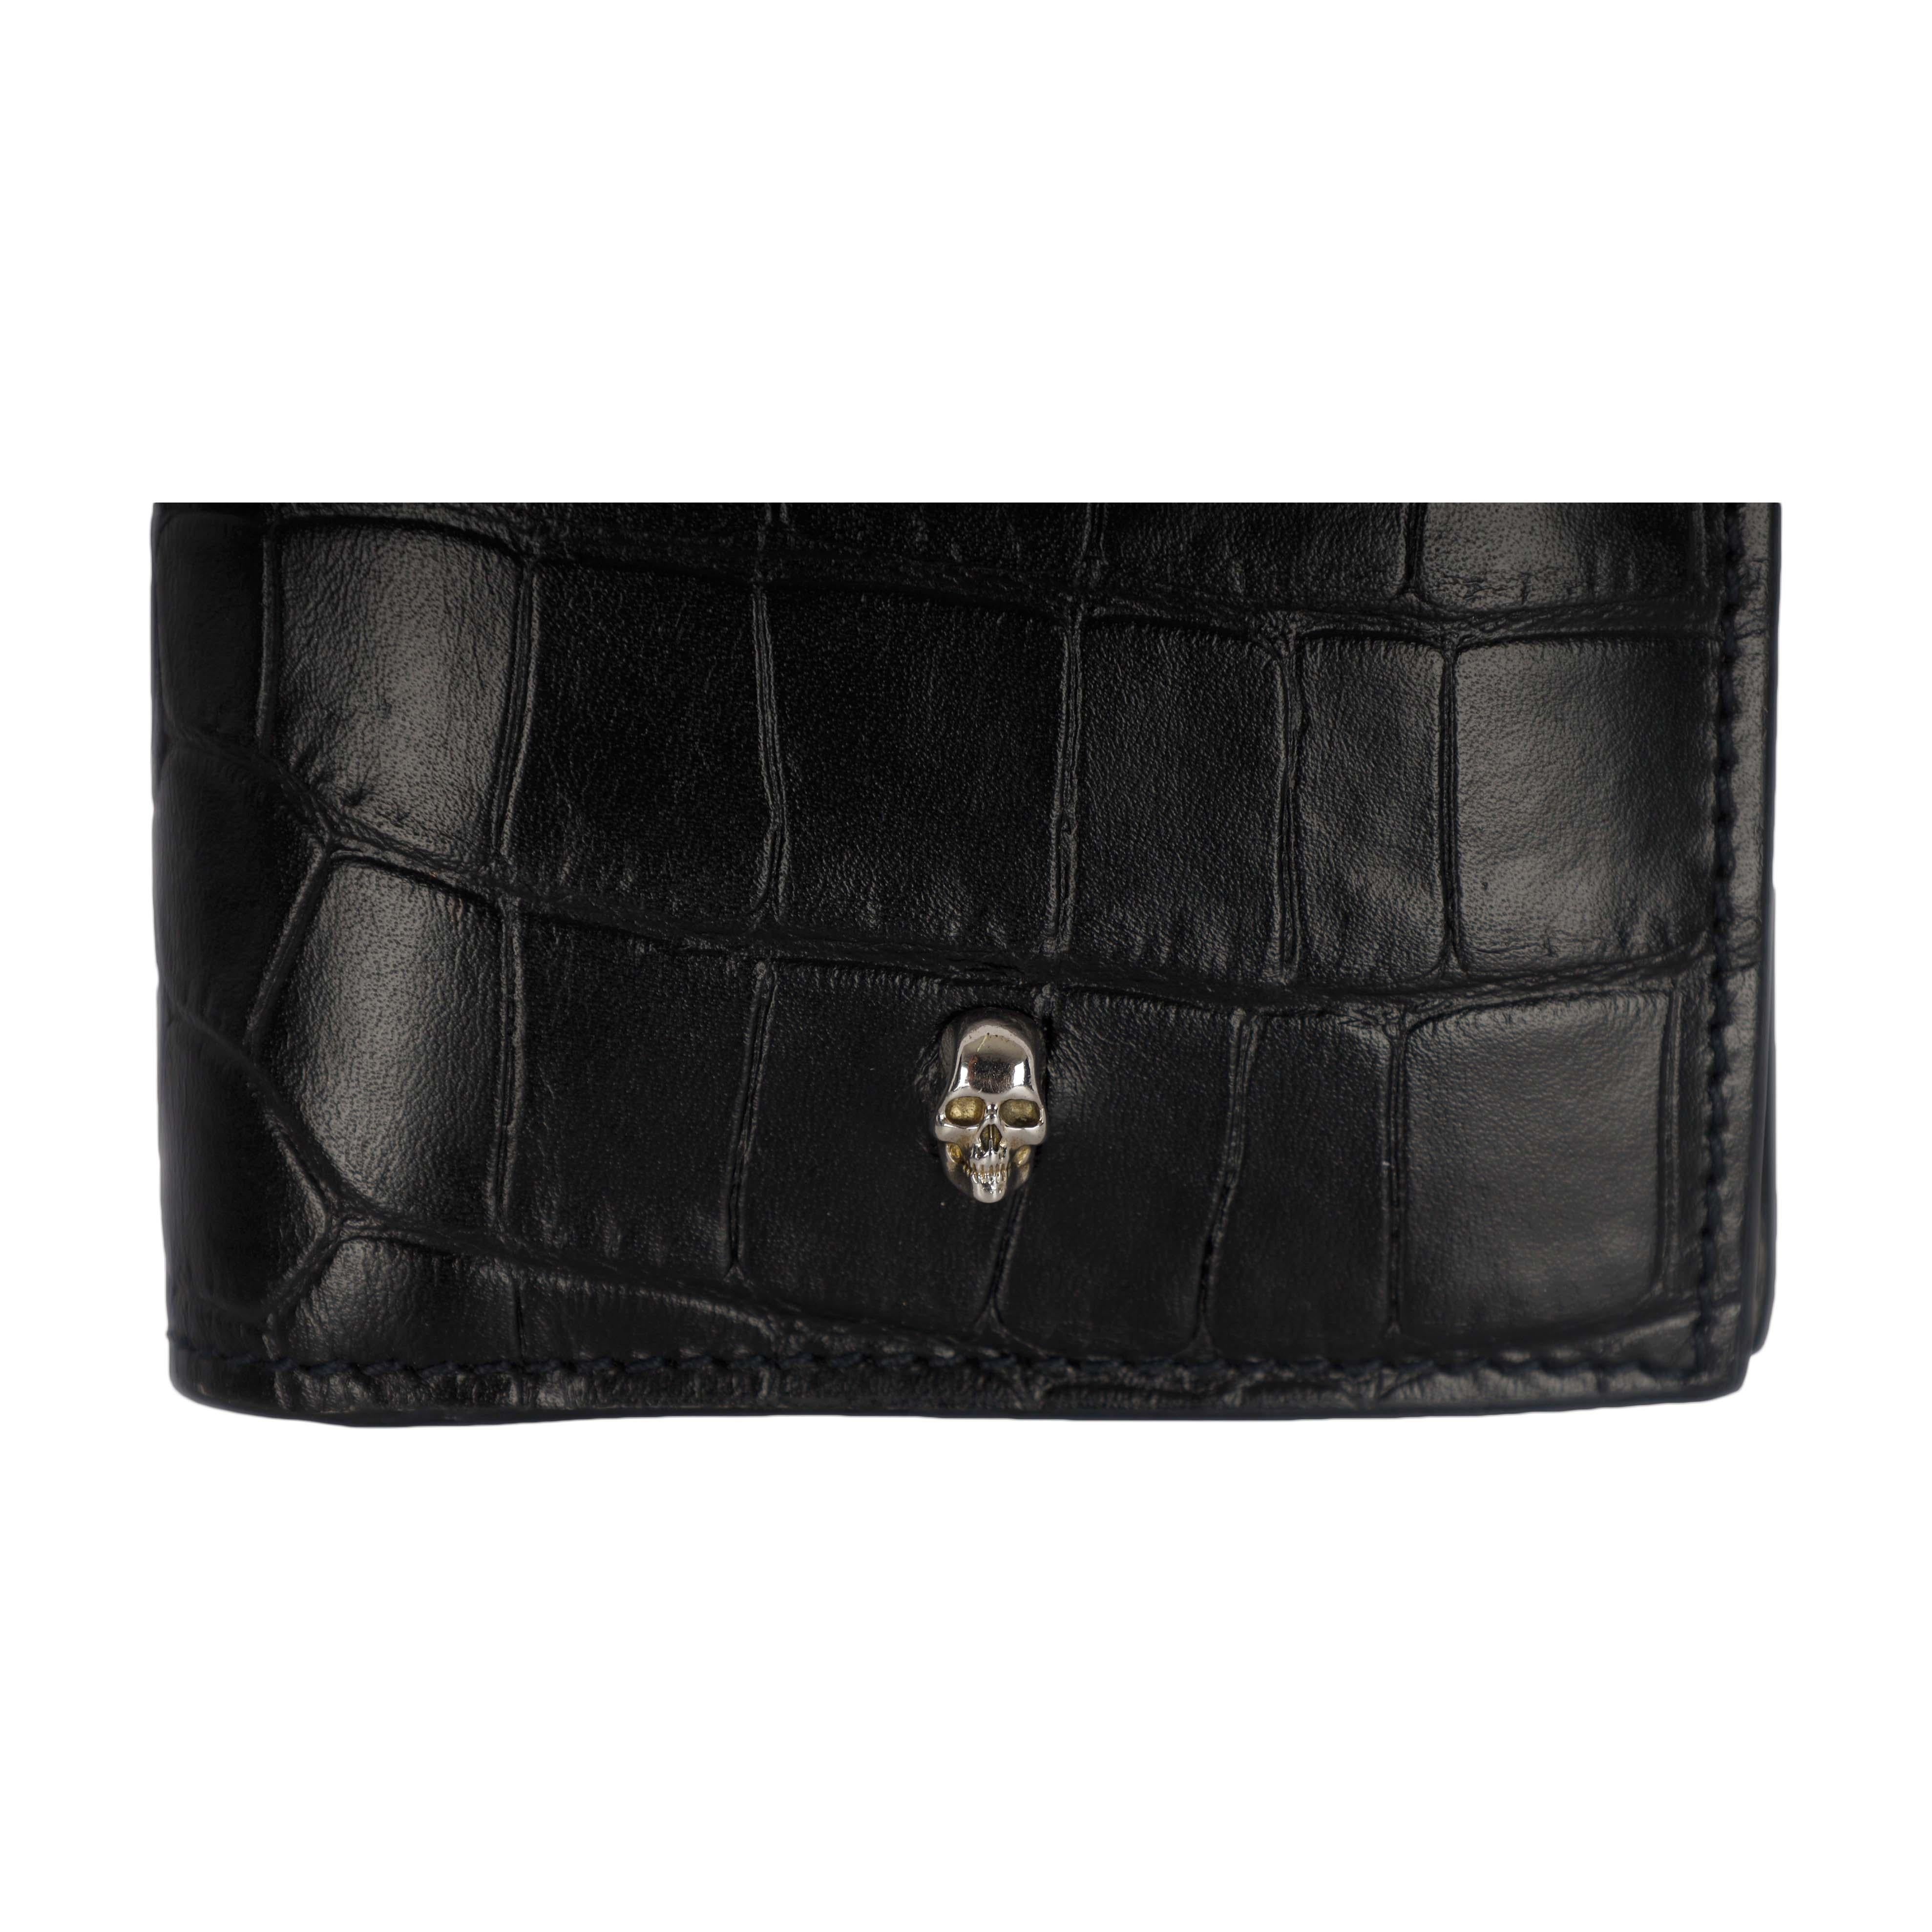 The Alexander McQueen black rectangular folded wallet with silver-hued skull features on embossed crocodile leather effect on the outside and blue card slots with a zip-up coin pouch and note compartment on the inside. Made in Italy, this piece in